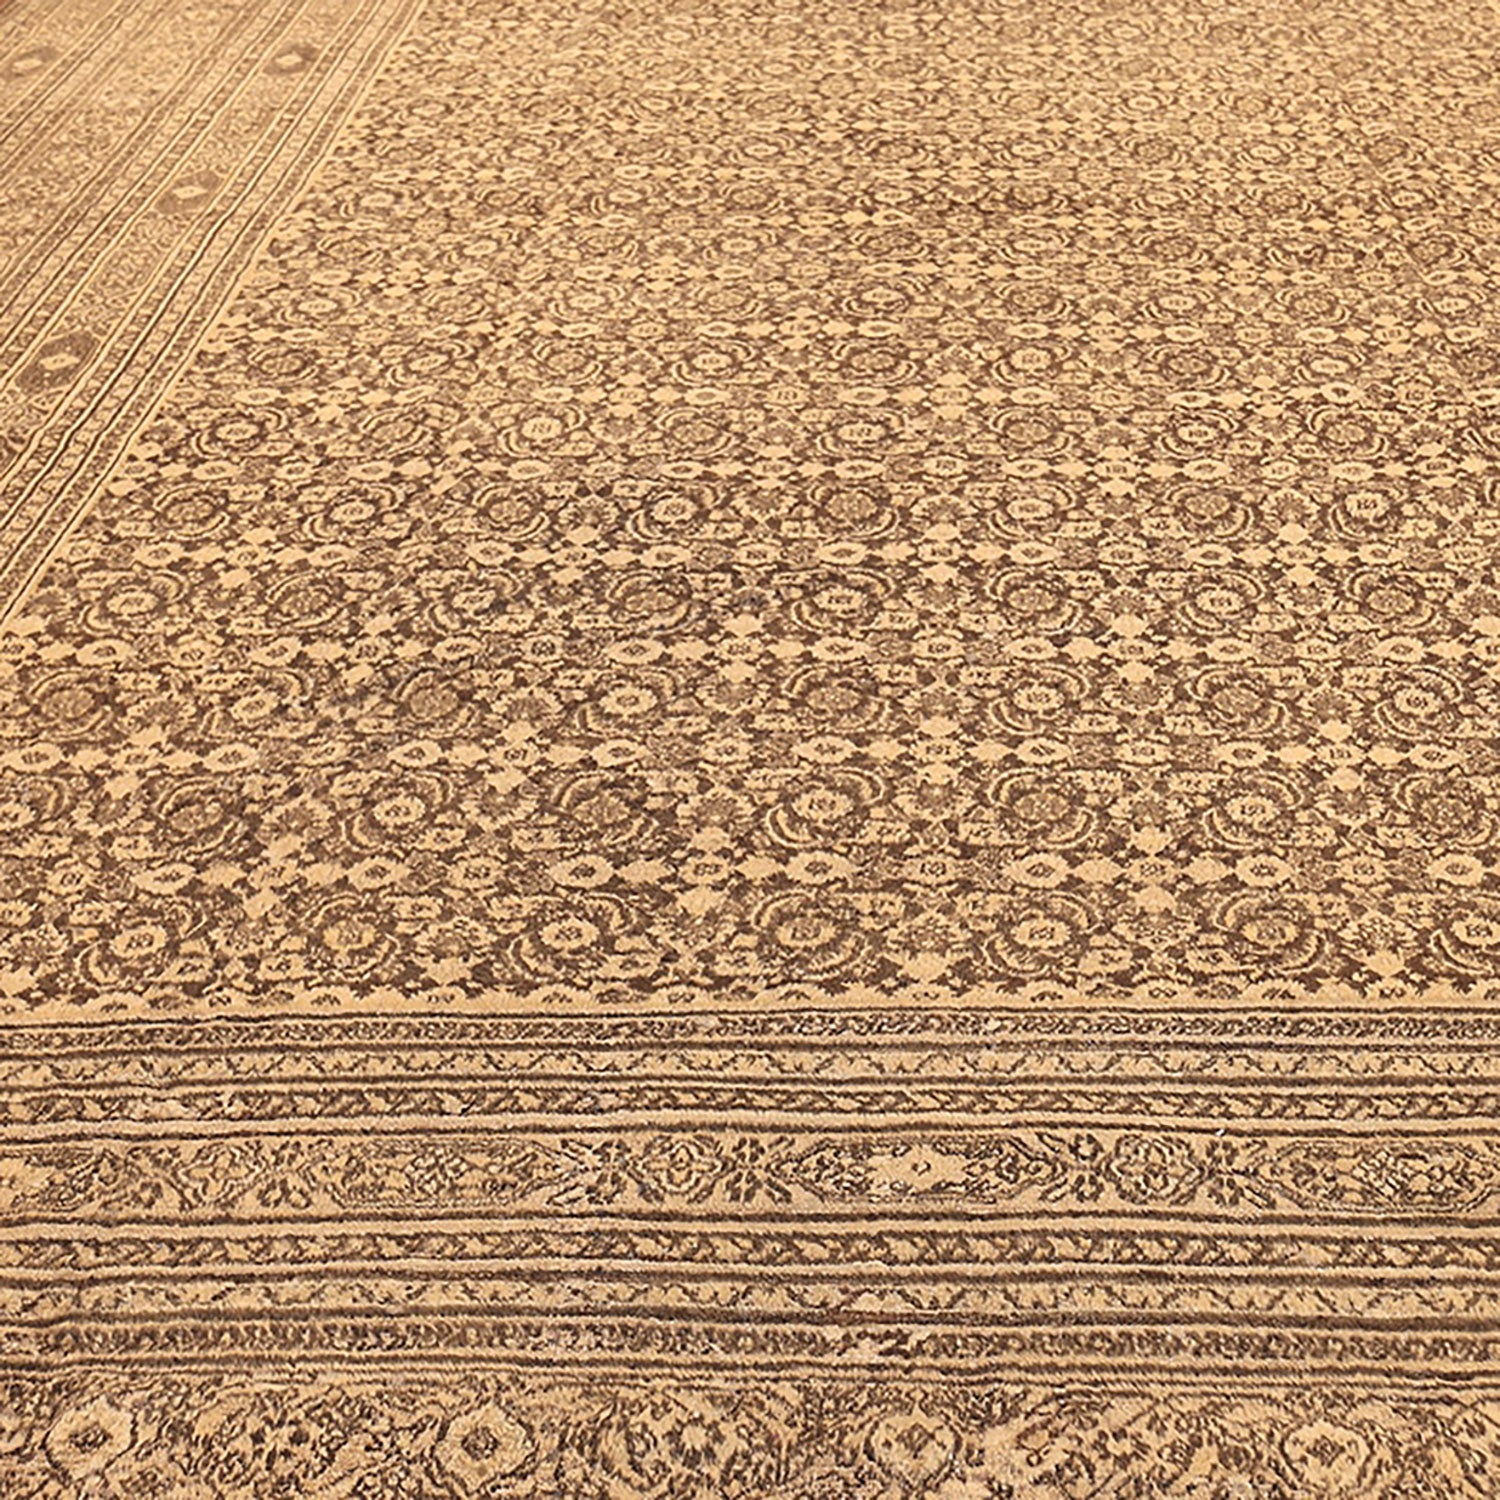 Exquisite traditional carpet with intricate floral and geometric patterns.